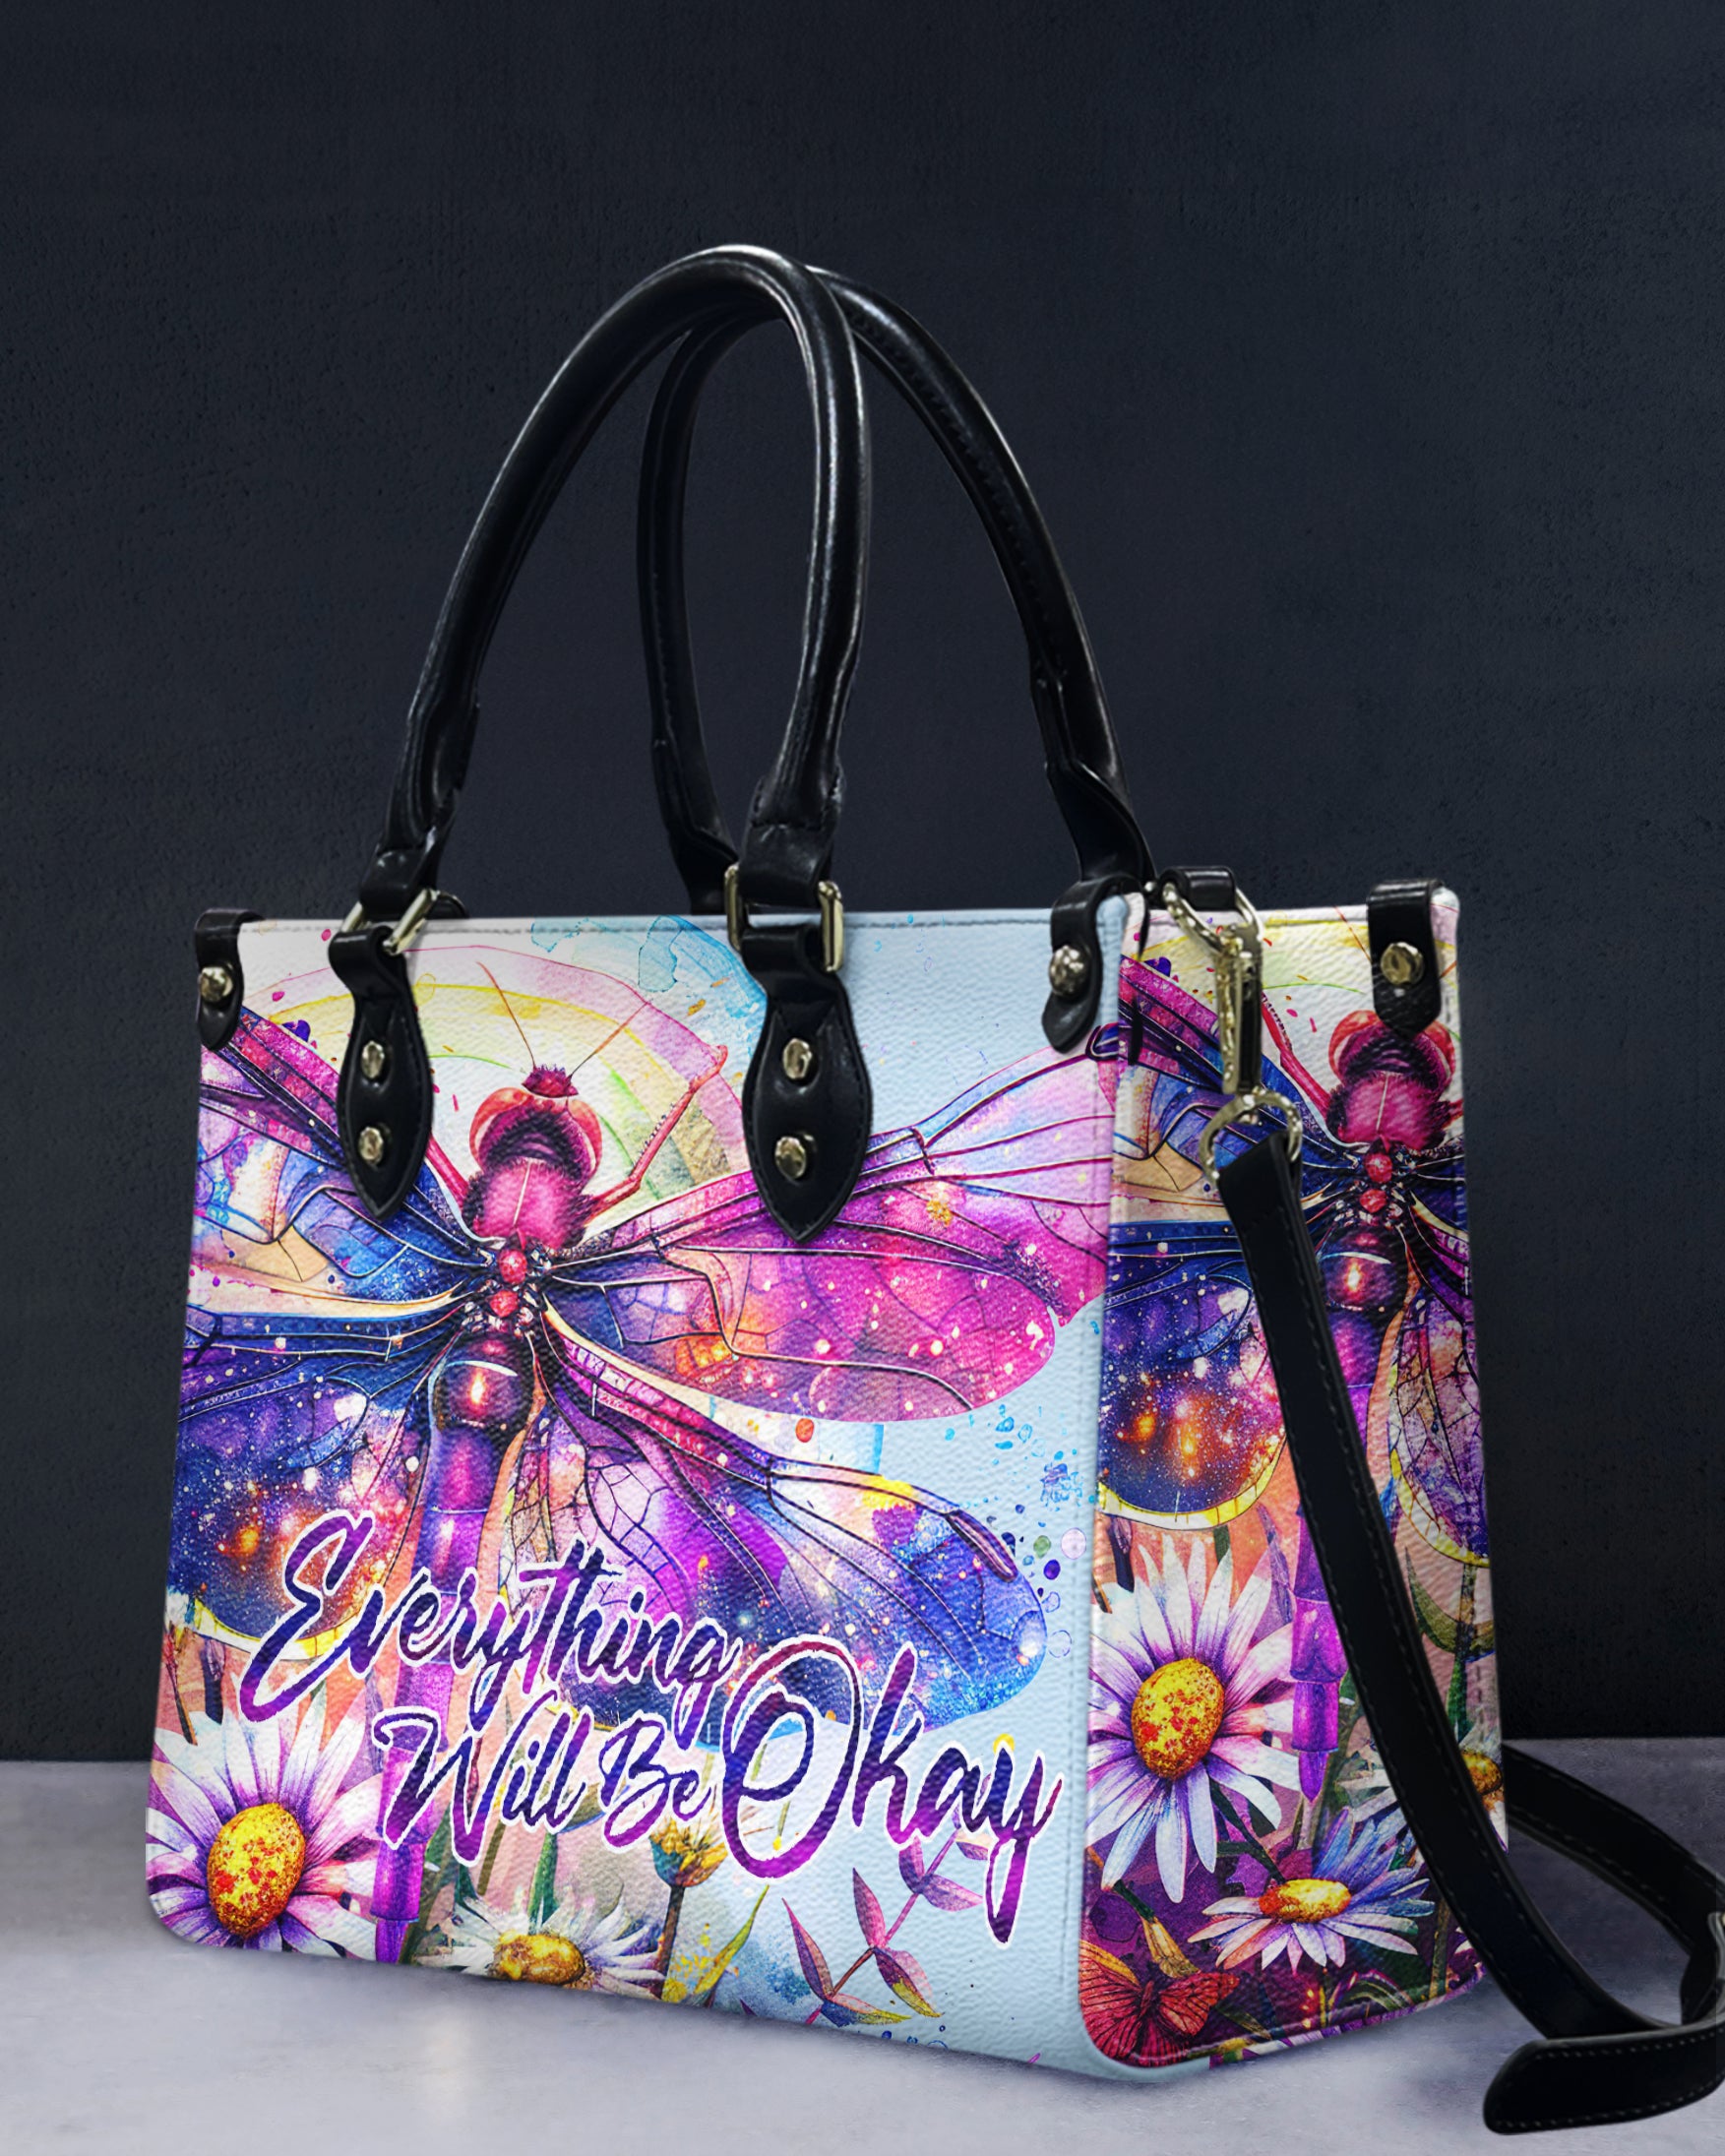 EVERYTHING WILL BE OKAY DRAGONFLY LEATHER HANDBAG - TY2303241